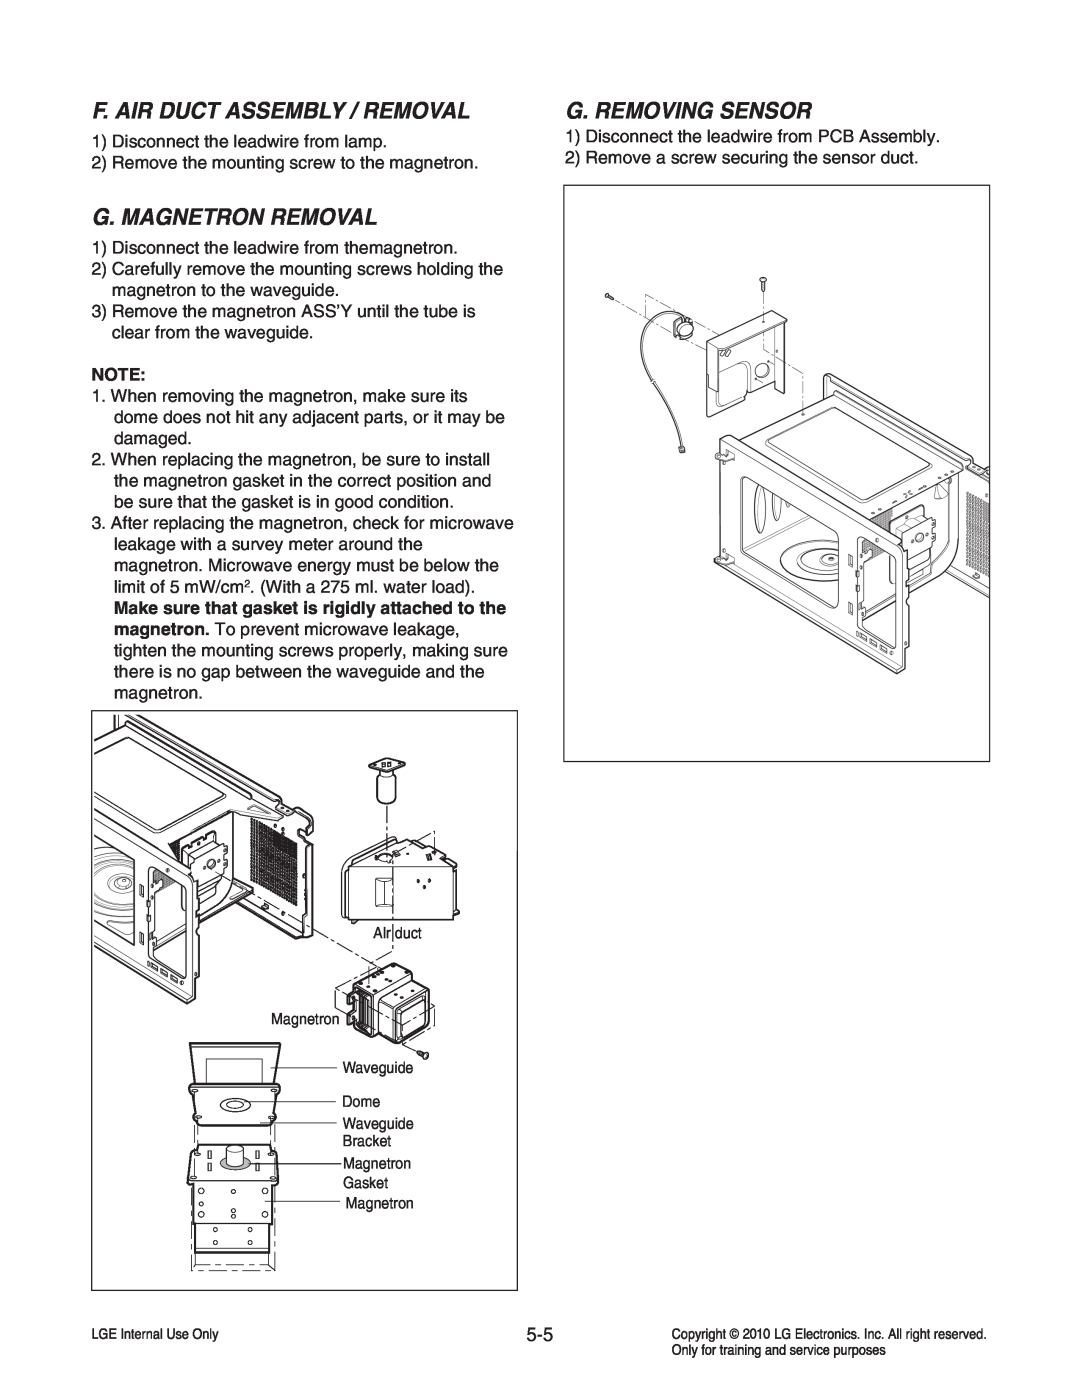 Frigidaire LCRT2010ST service manual F. Air Duct Assembly / Removal, G. Magnetron Removal, G. Removing Sensor 